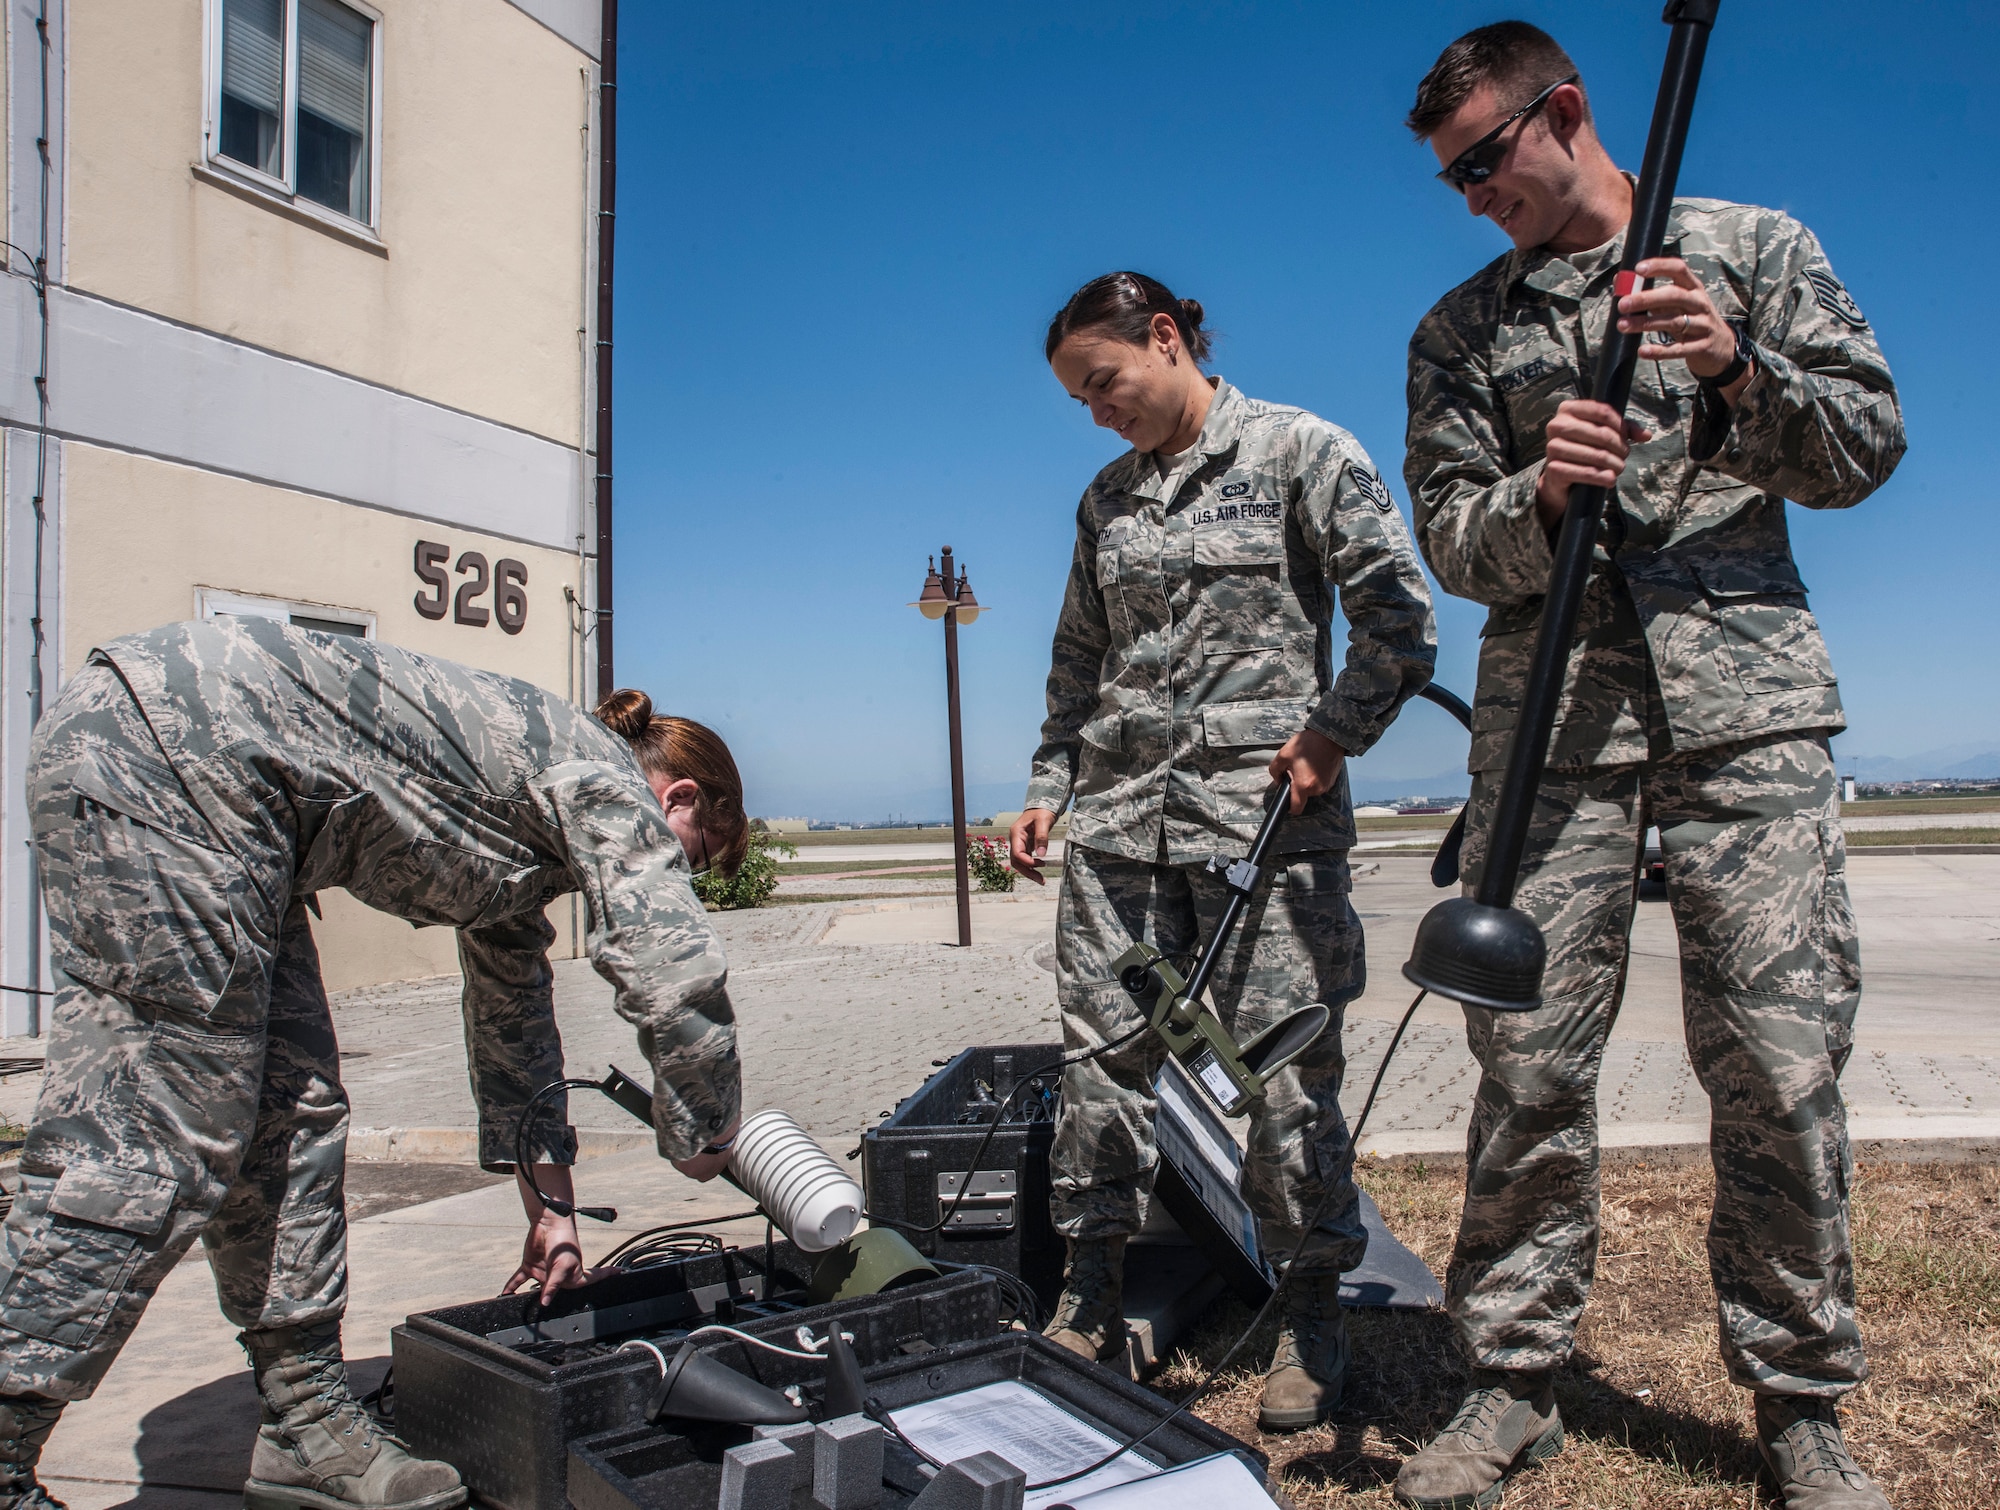 Staff Sgts. Elizabeth Goodwin, Natasha Smith and Michael Beckner, 39th Operations Squadron weather technicians, assemble a tactical meteorological equipment tower June 21, 2013, at Incirlik Air Base, Turkey. The tower is just one piece of equipment the weather flight uses to track weather patterns. (U.S. Air Force photo by Senior Airman Anthony Sanchelli/Released)
